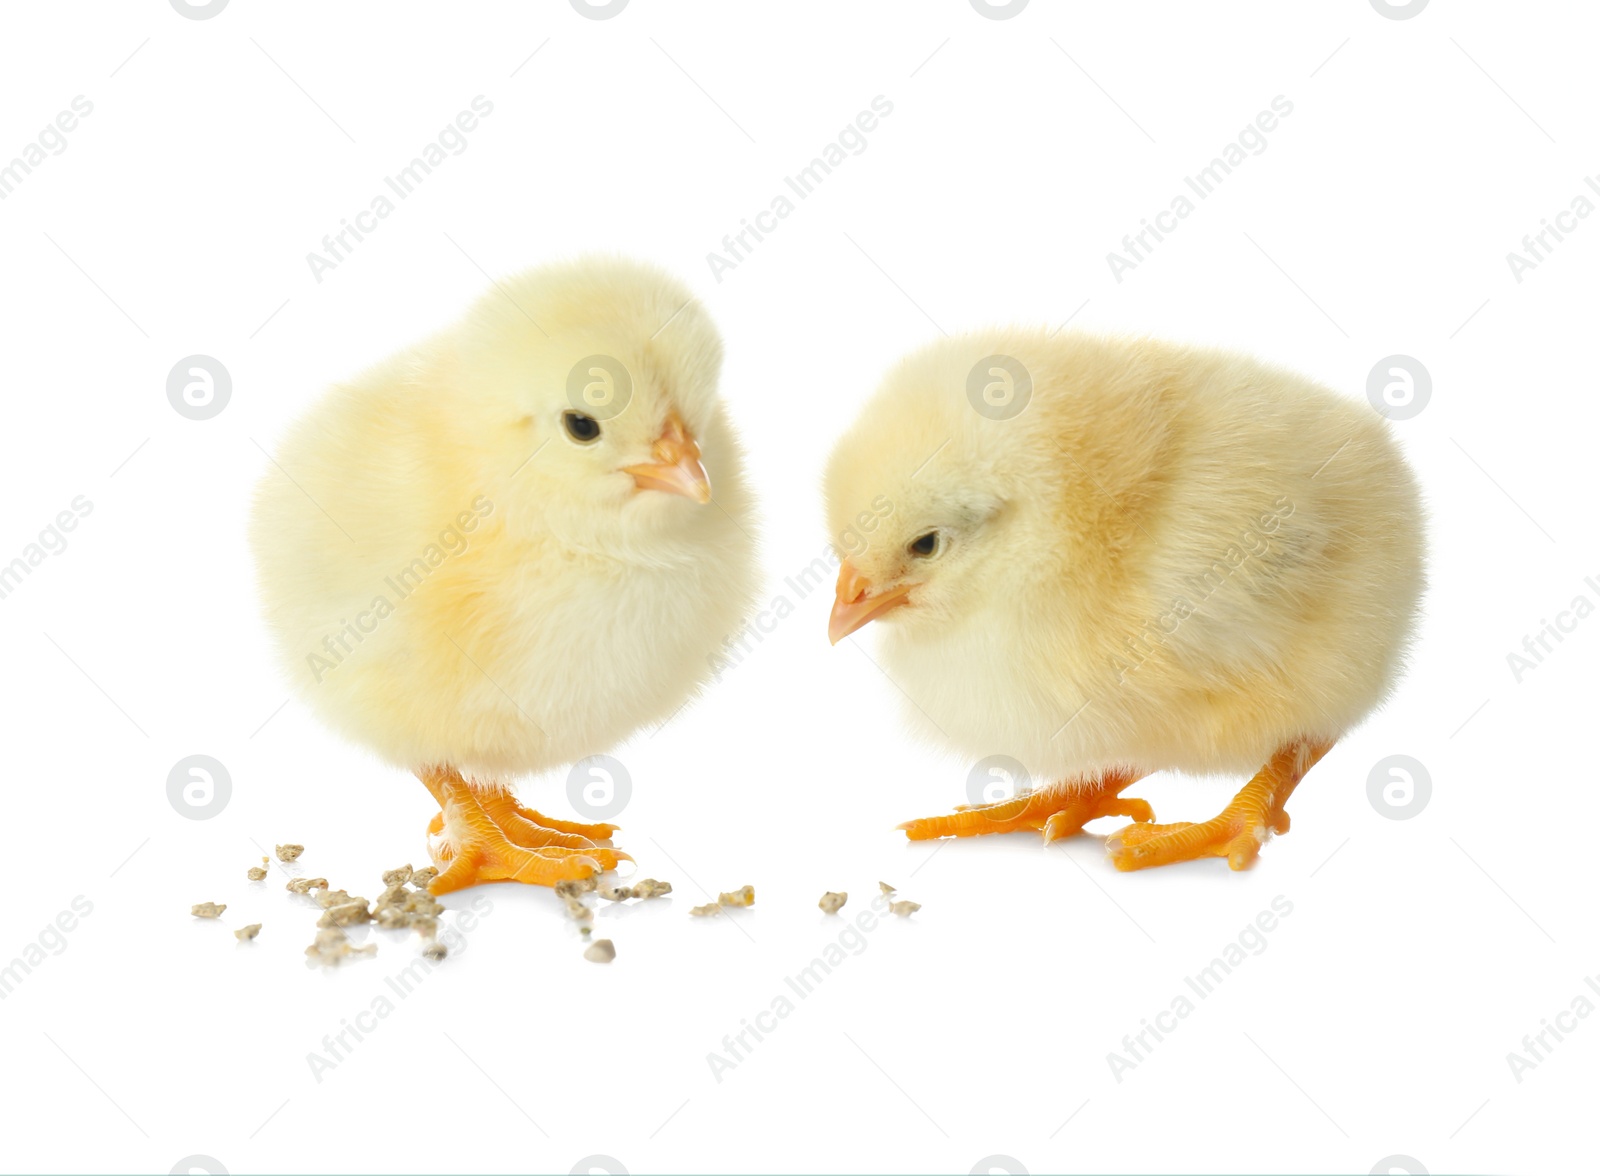 Photo of Cute fluffy baby chickens with millet groats on white background. Farm animals